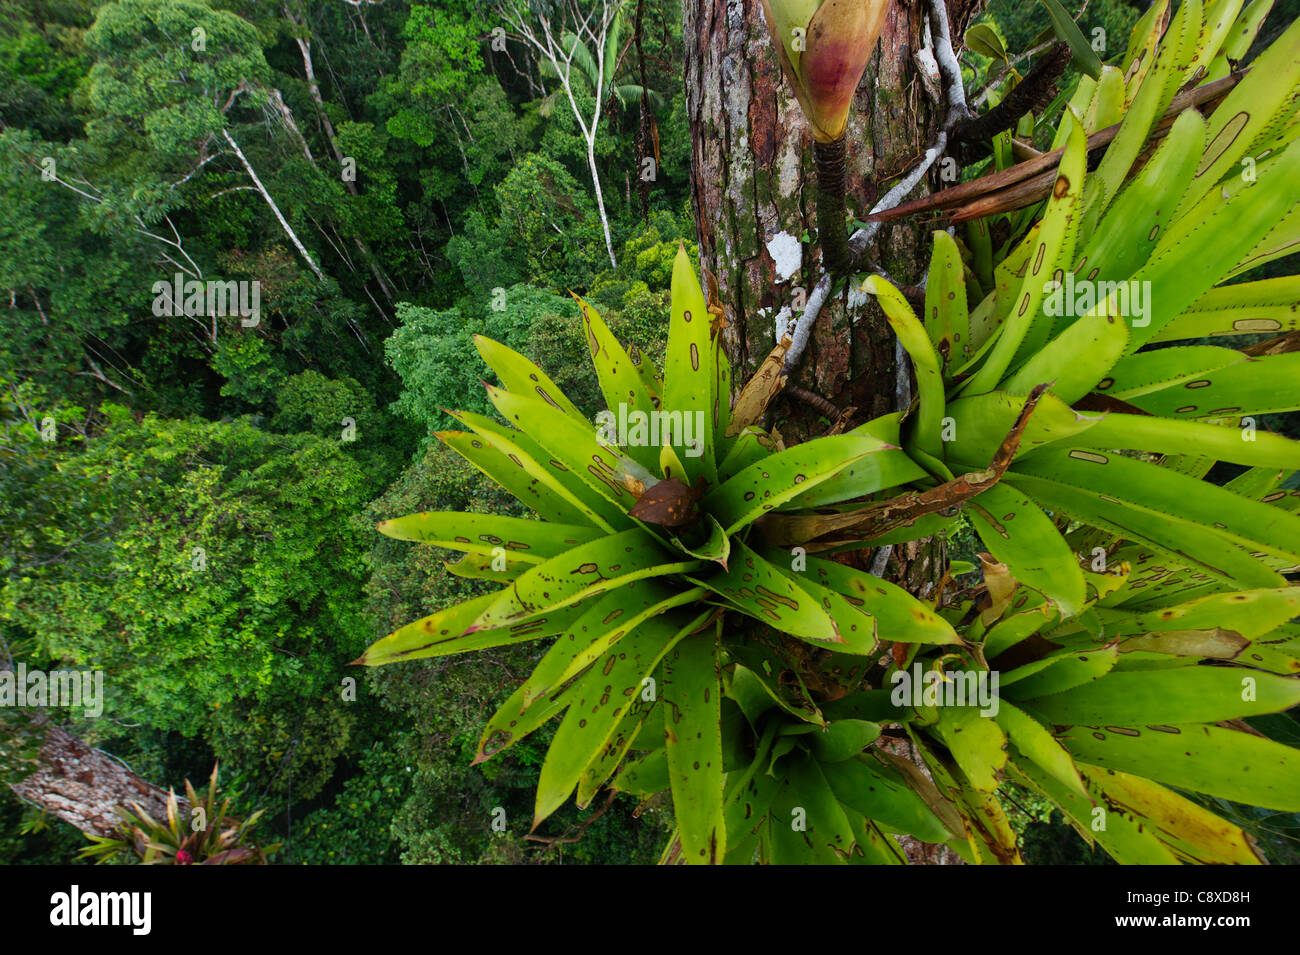 Bromeliad sp. growing on emergent tree in rainforest canopy nr Iquitos Amazon Peru Stock Photo